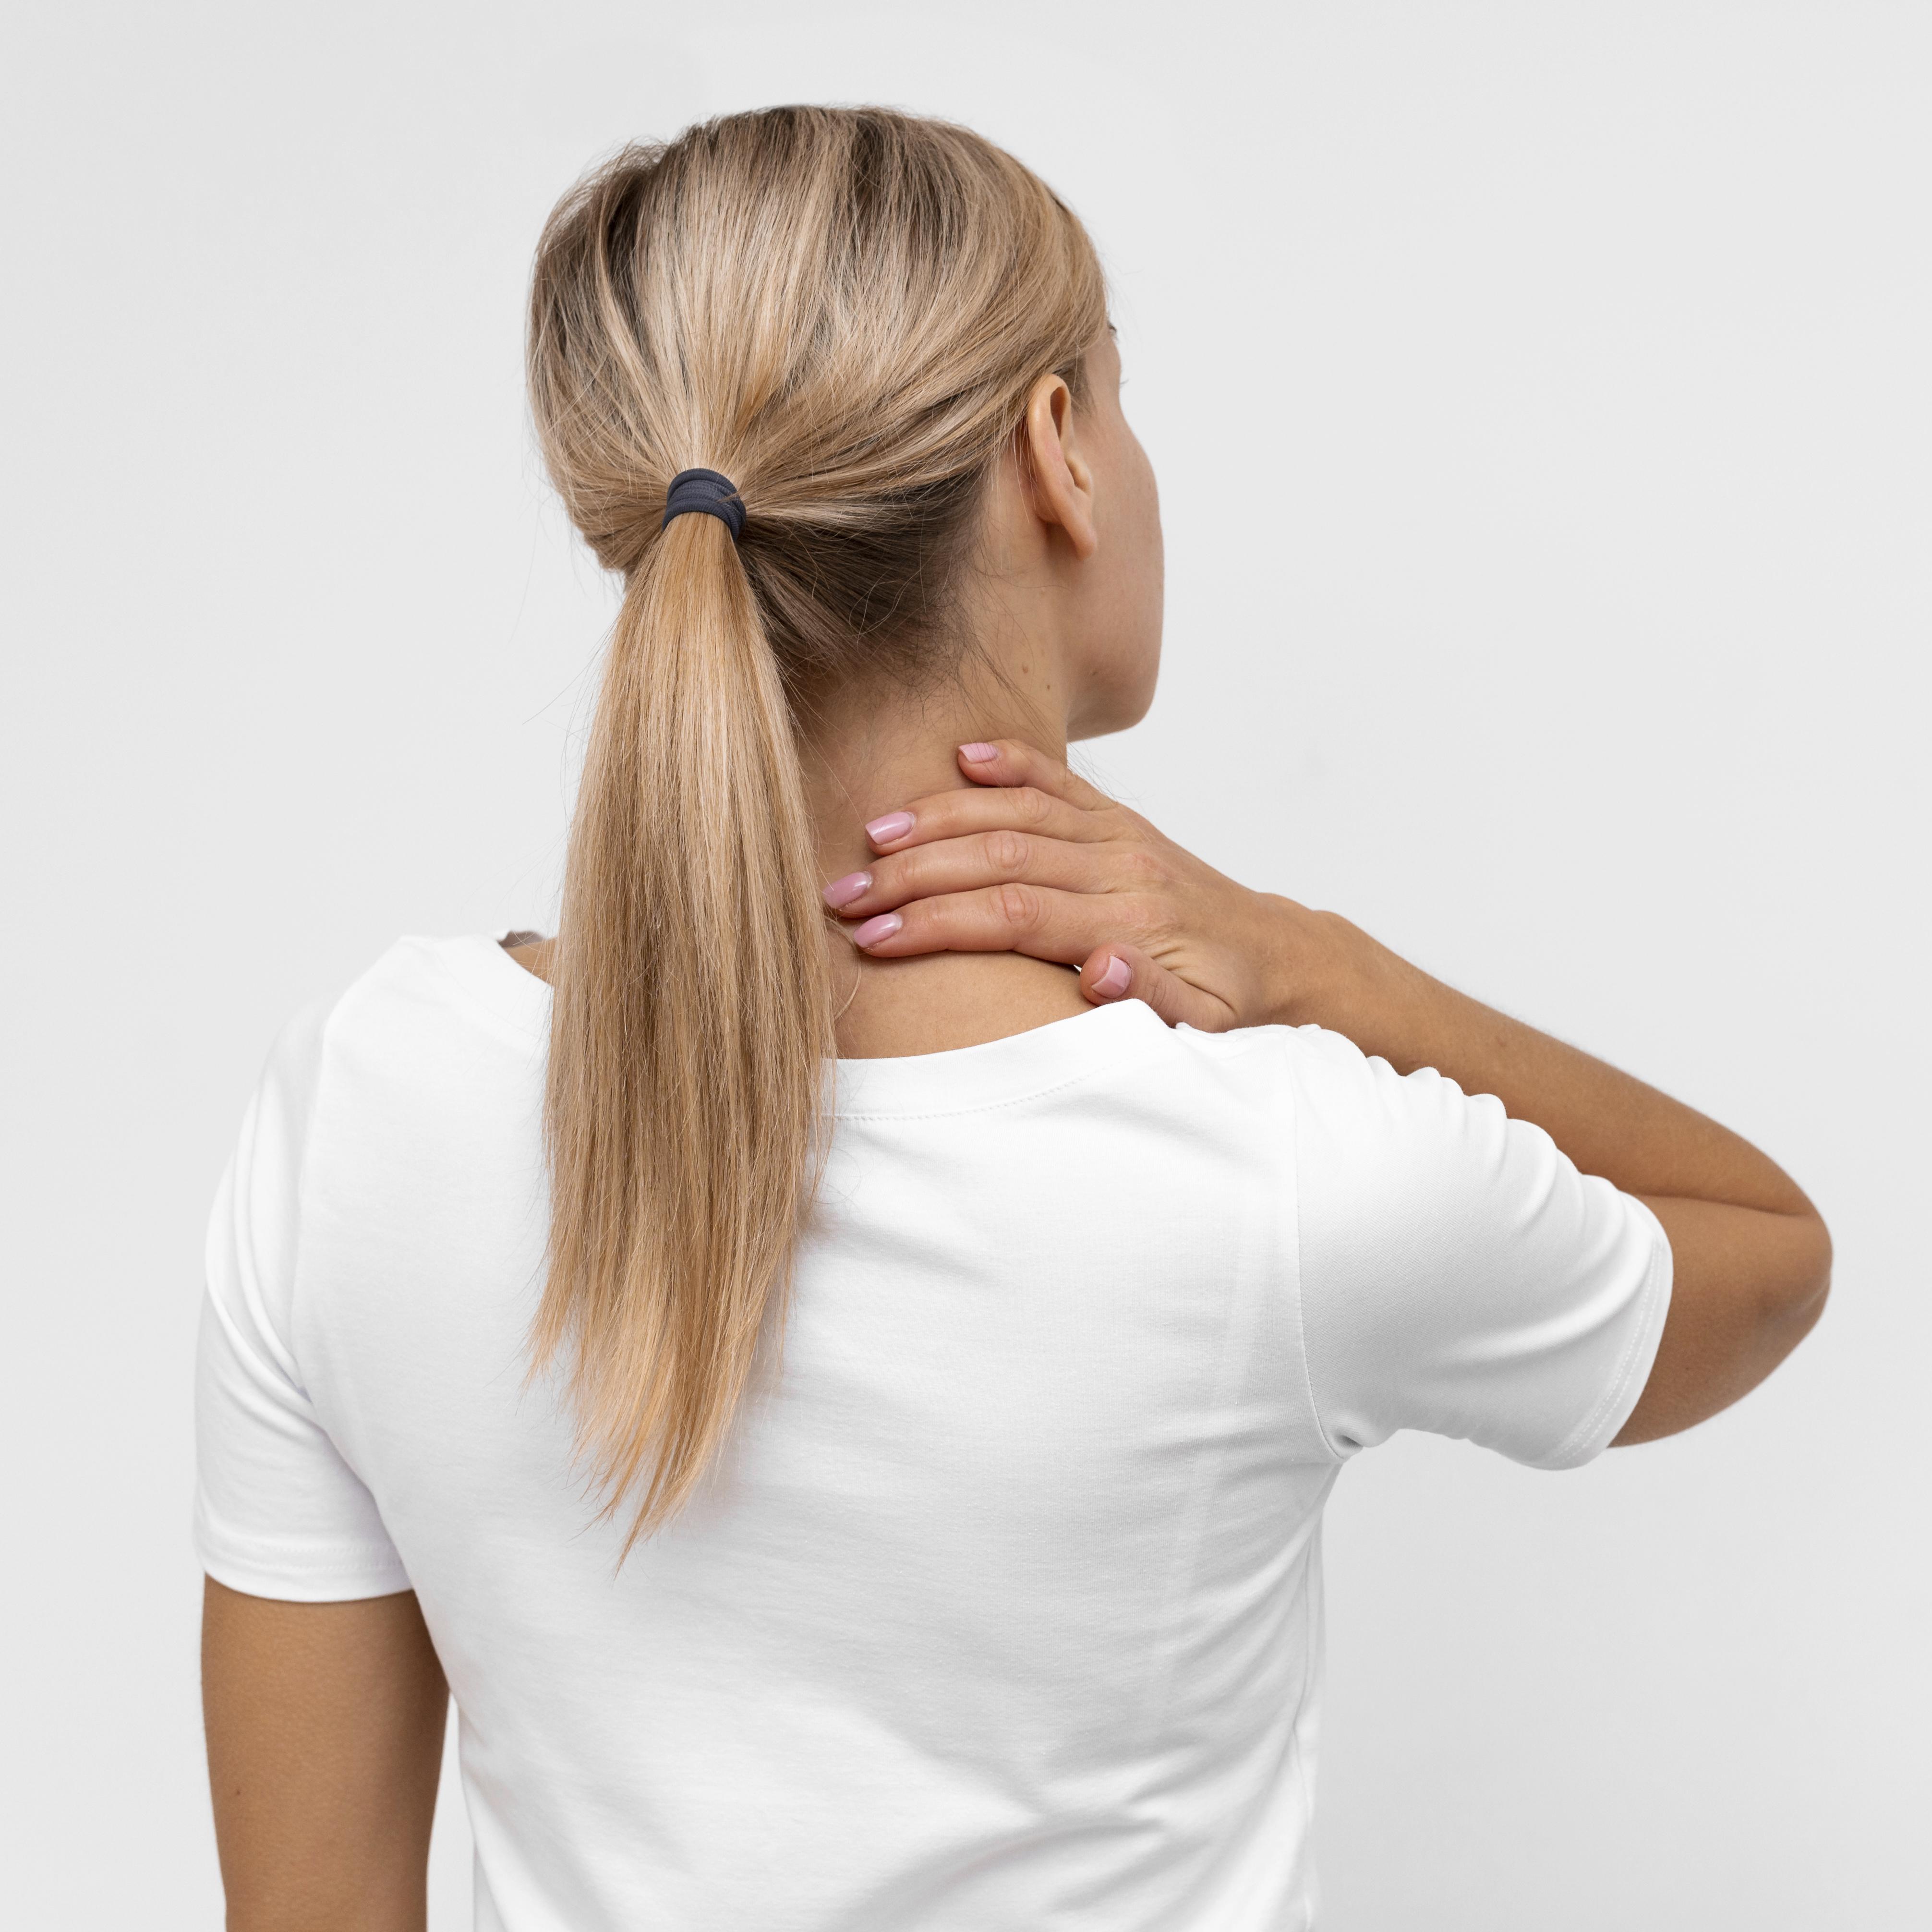 Effective Remedies To Get Relief From Neck Pain